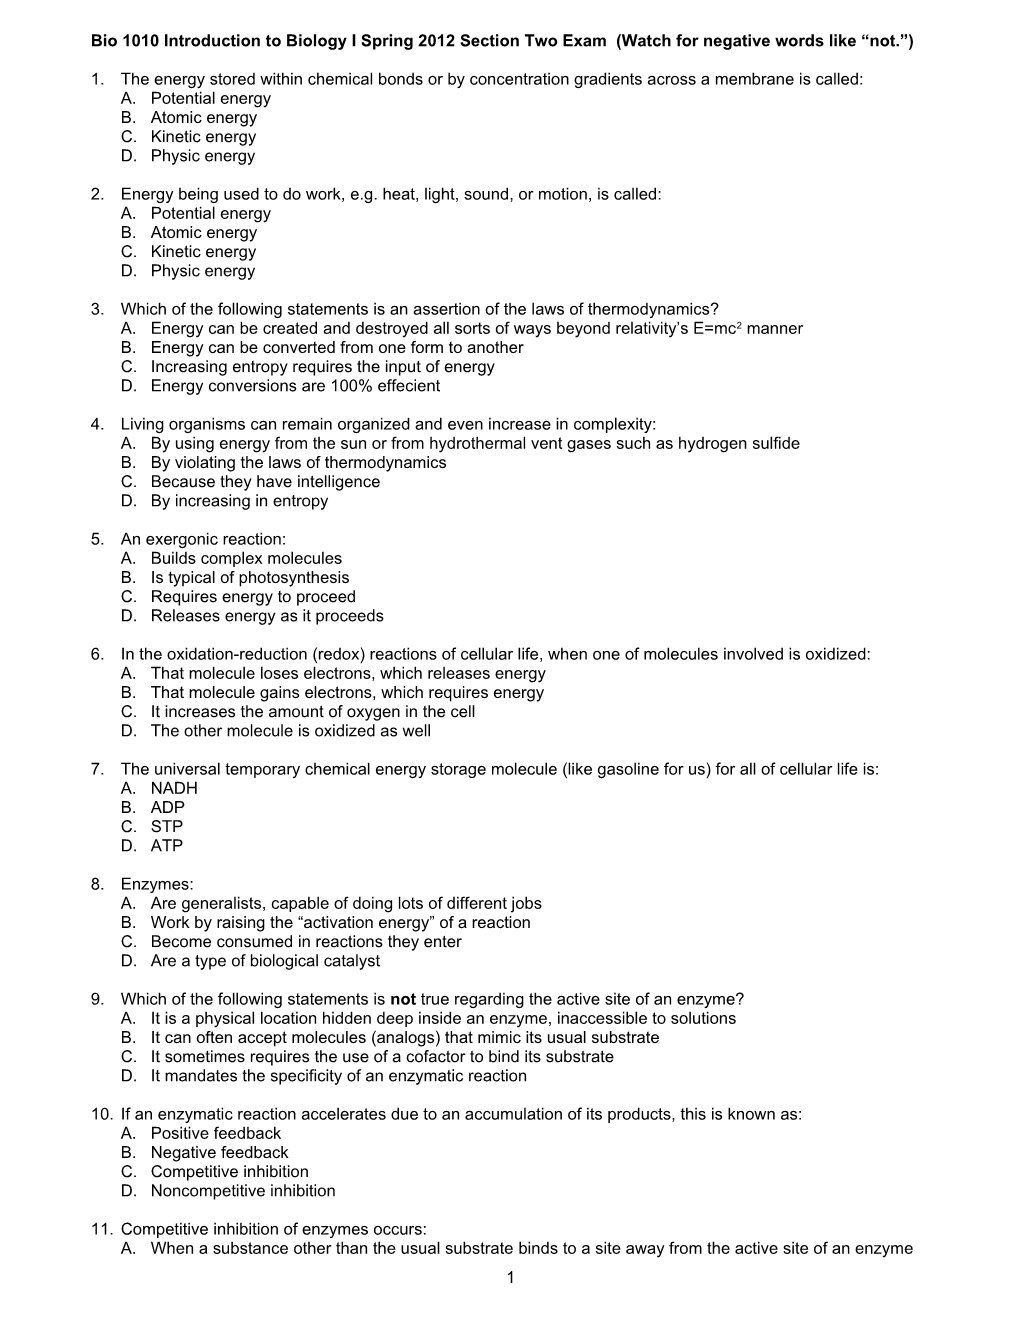 Bio 1010 Introduction to Biology I Spring 2012 Section Two Exam (Watch for Negative Words